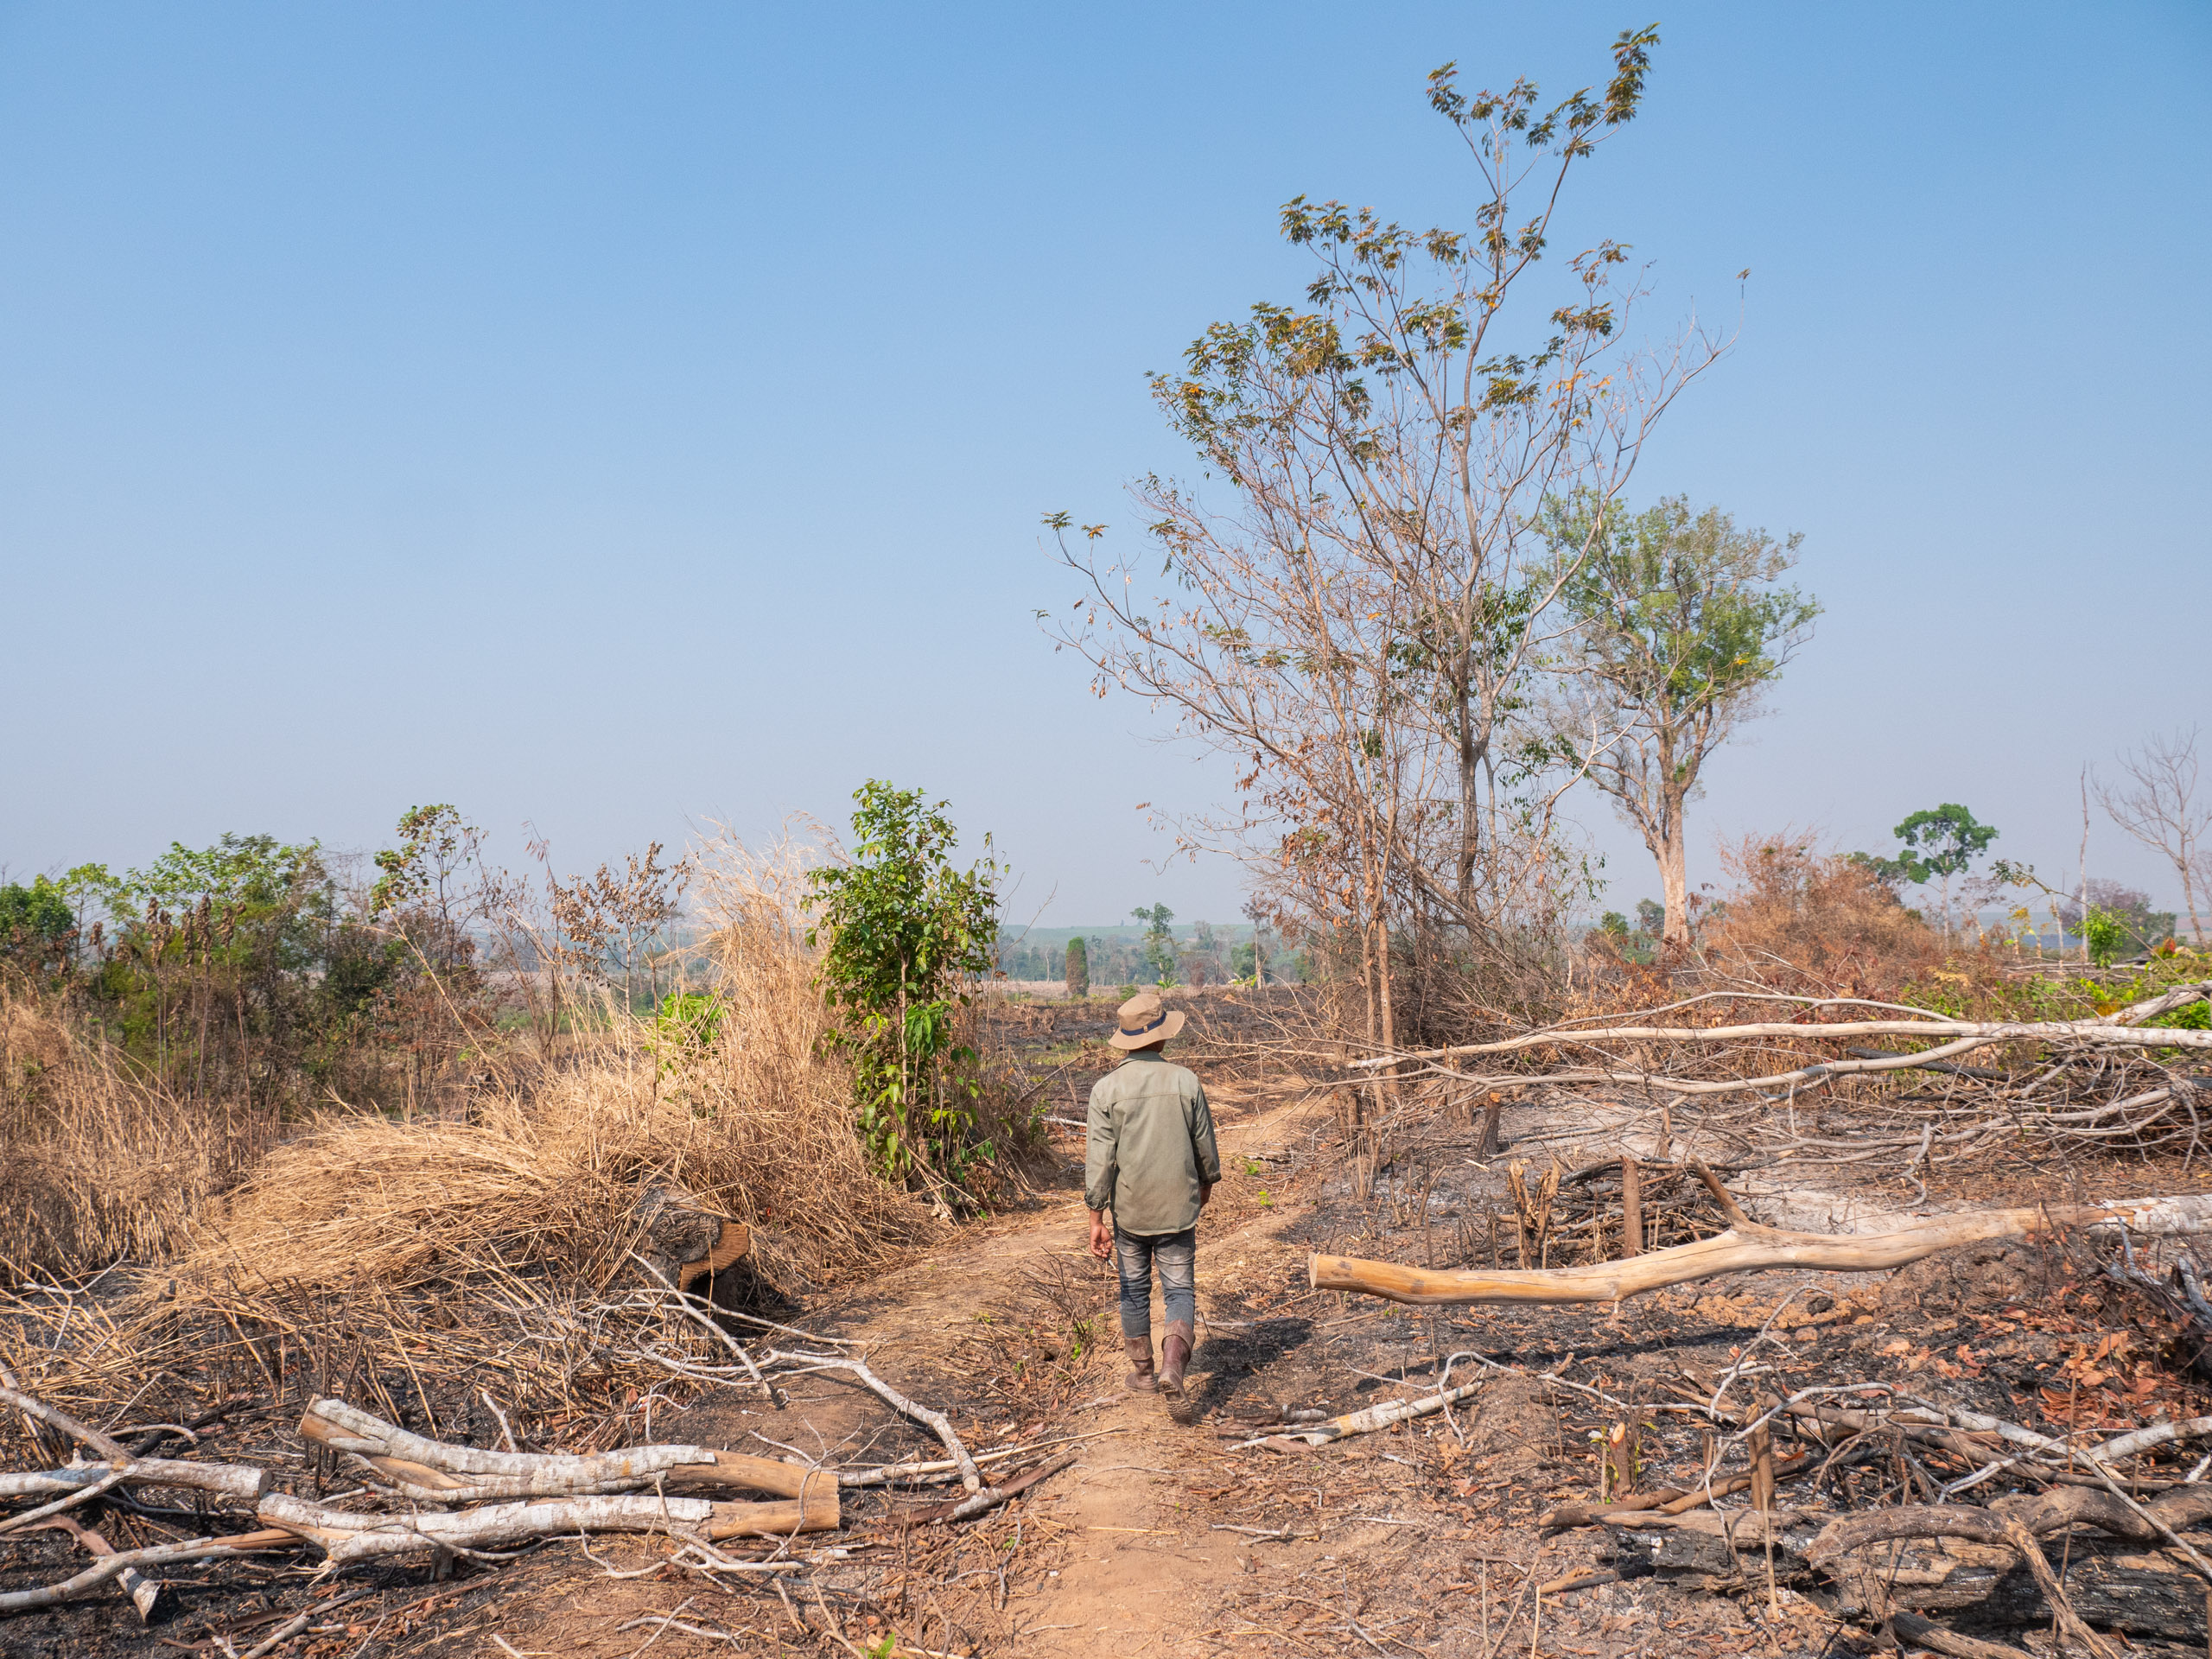 man walking on dirt path between deforested trees